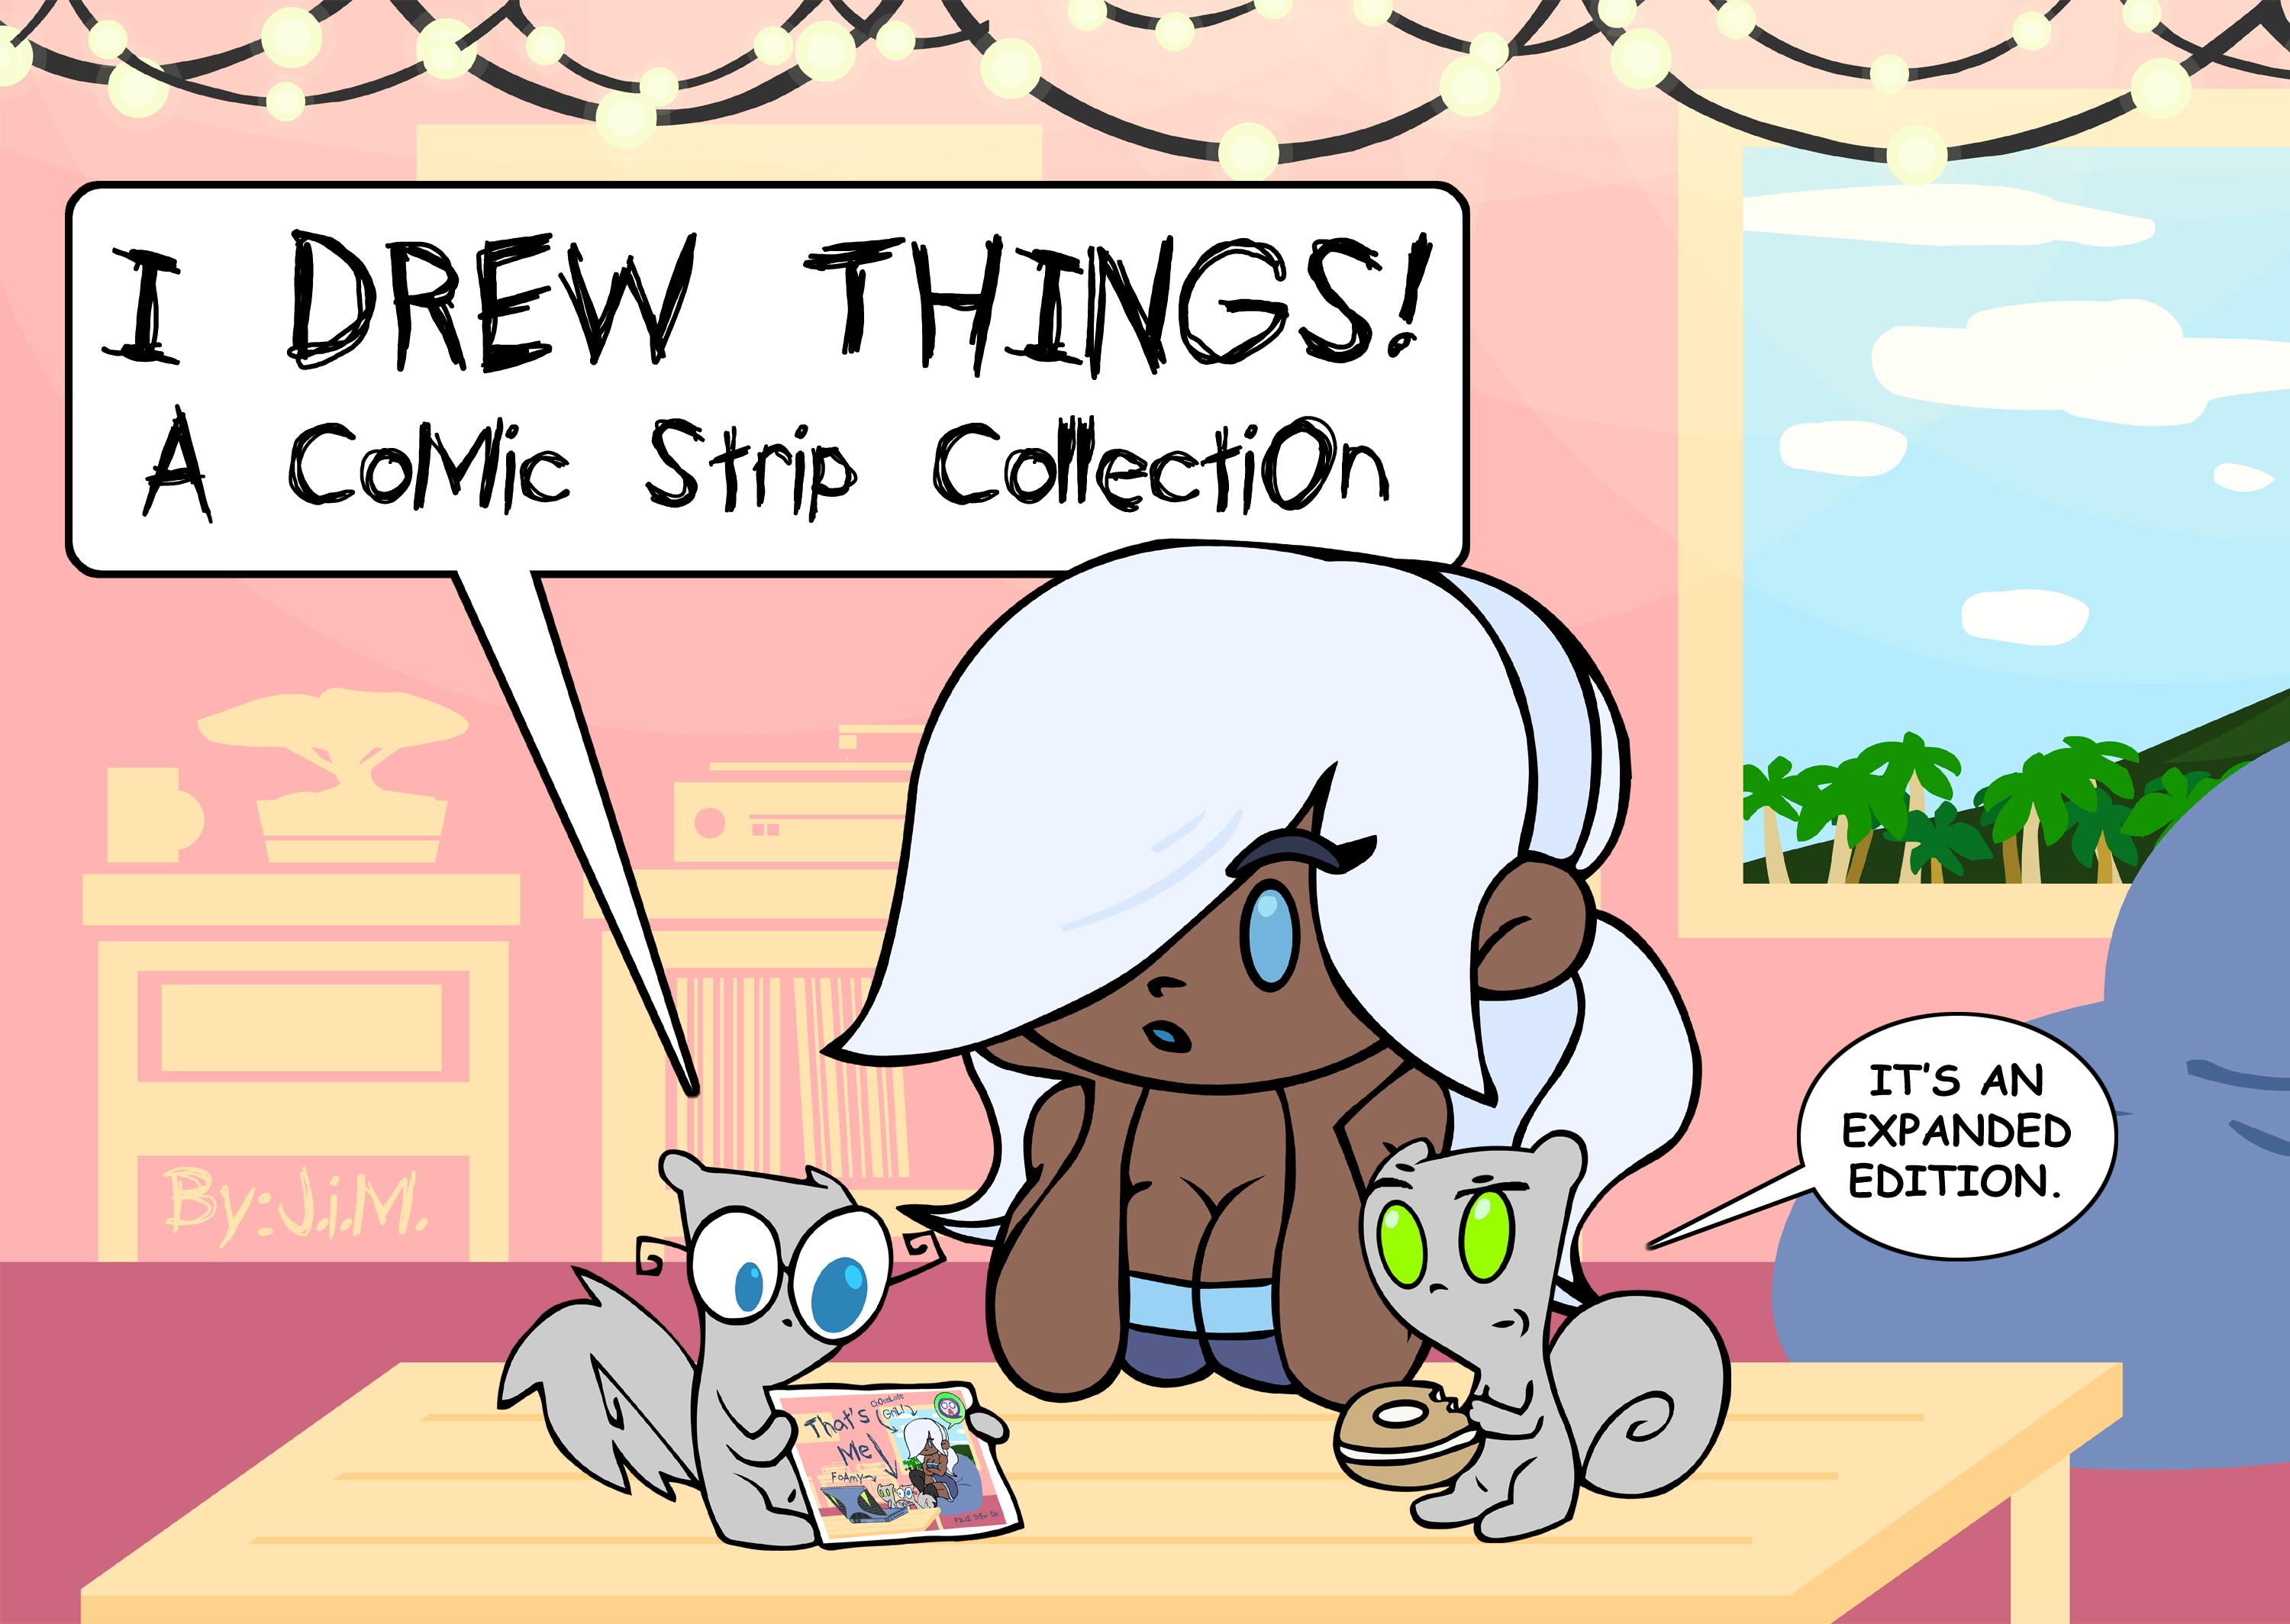 I Drew Things : A Comic Strip Collection (Expanded) (Foamy The Squirrel)